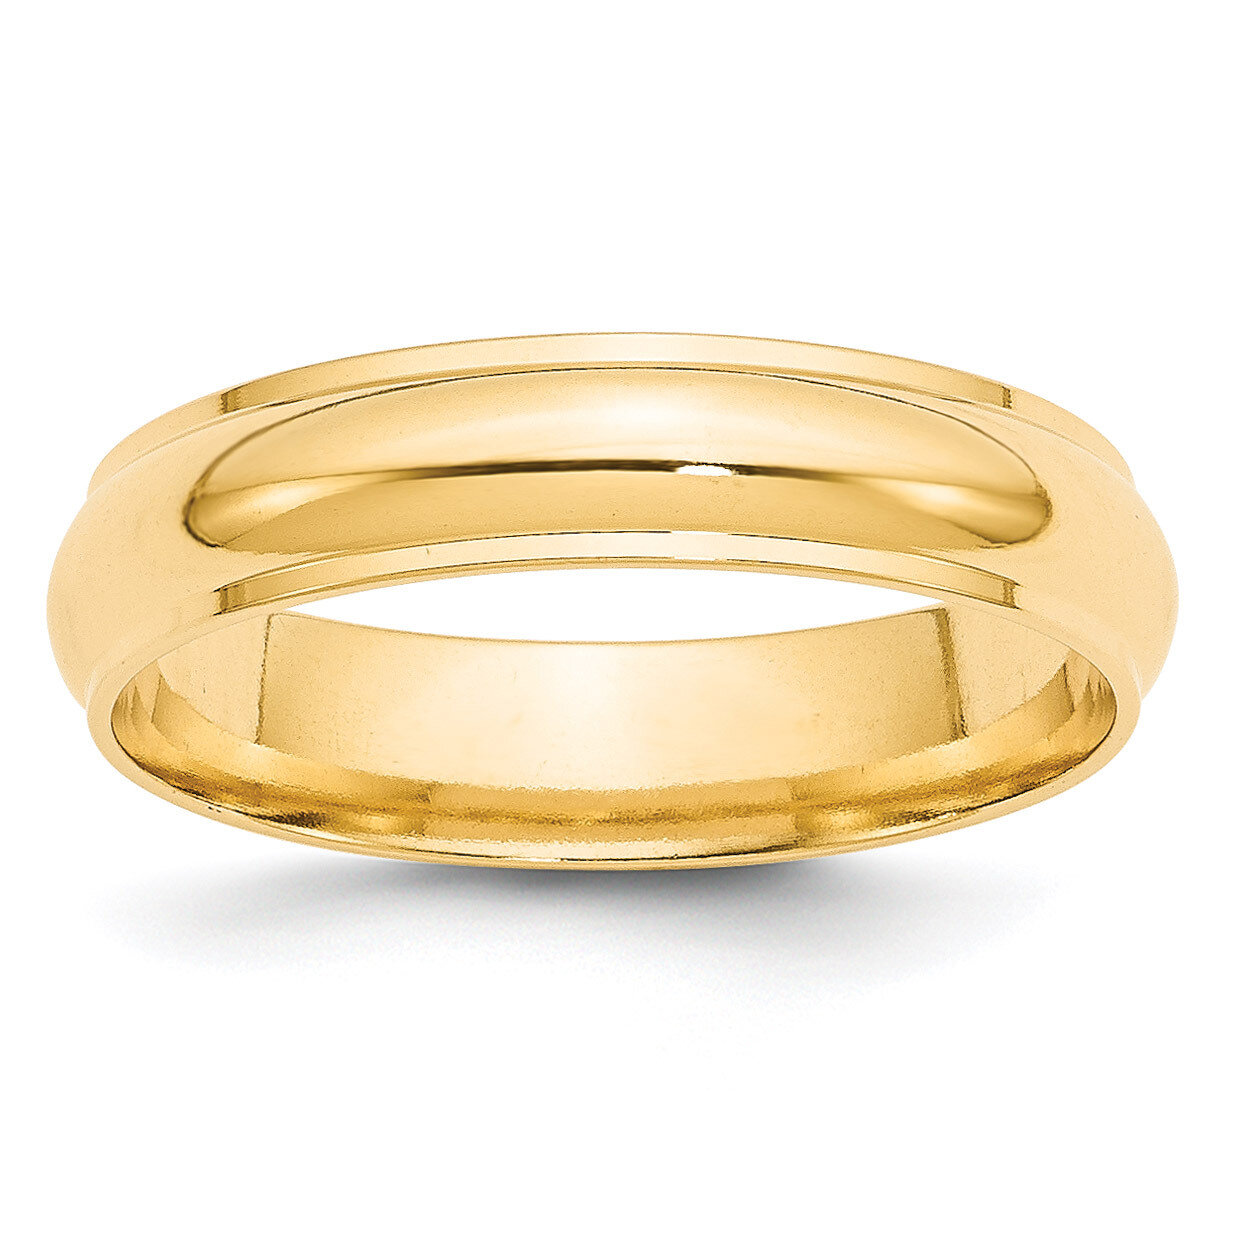 5mm Half Round with Edge Band 14k Yellow Gold HRE050 Engravable